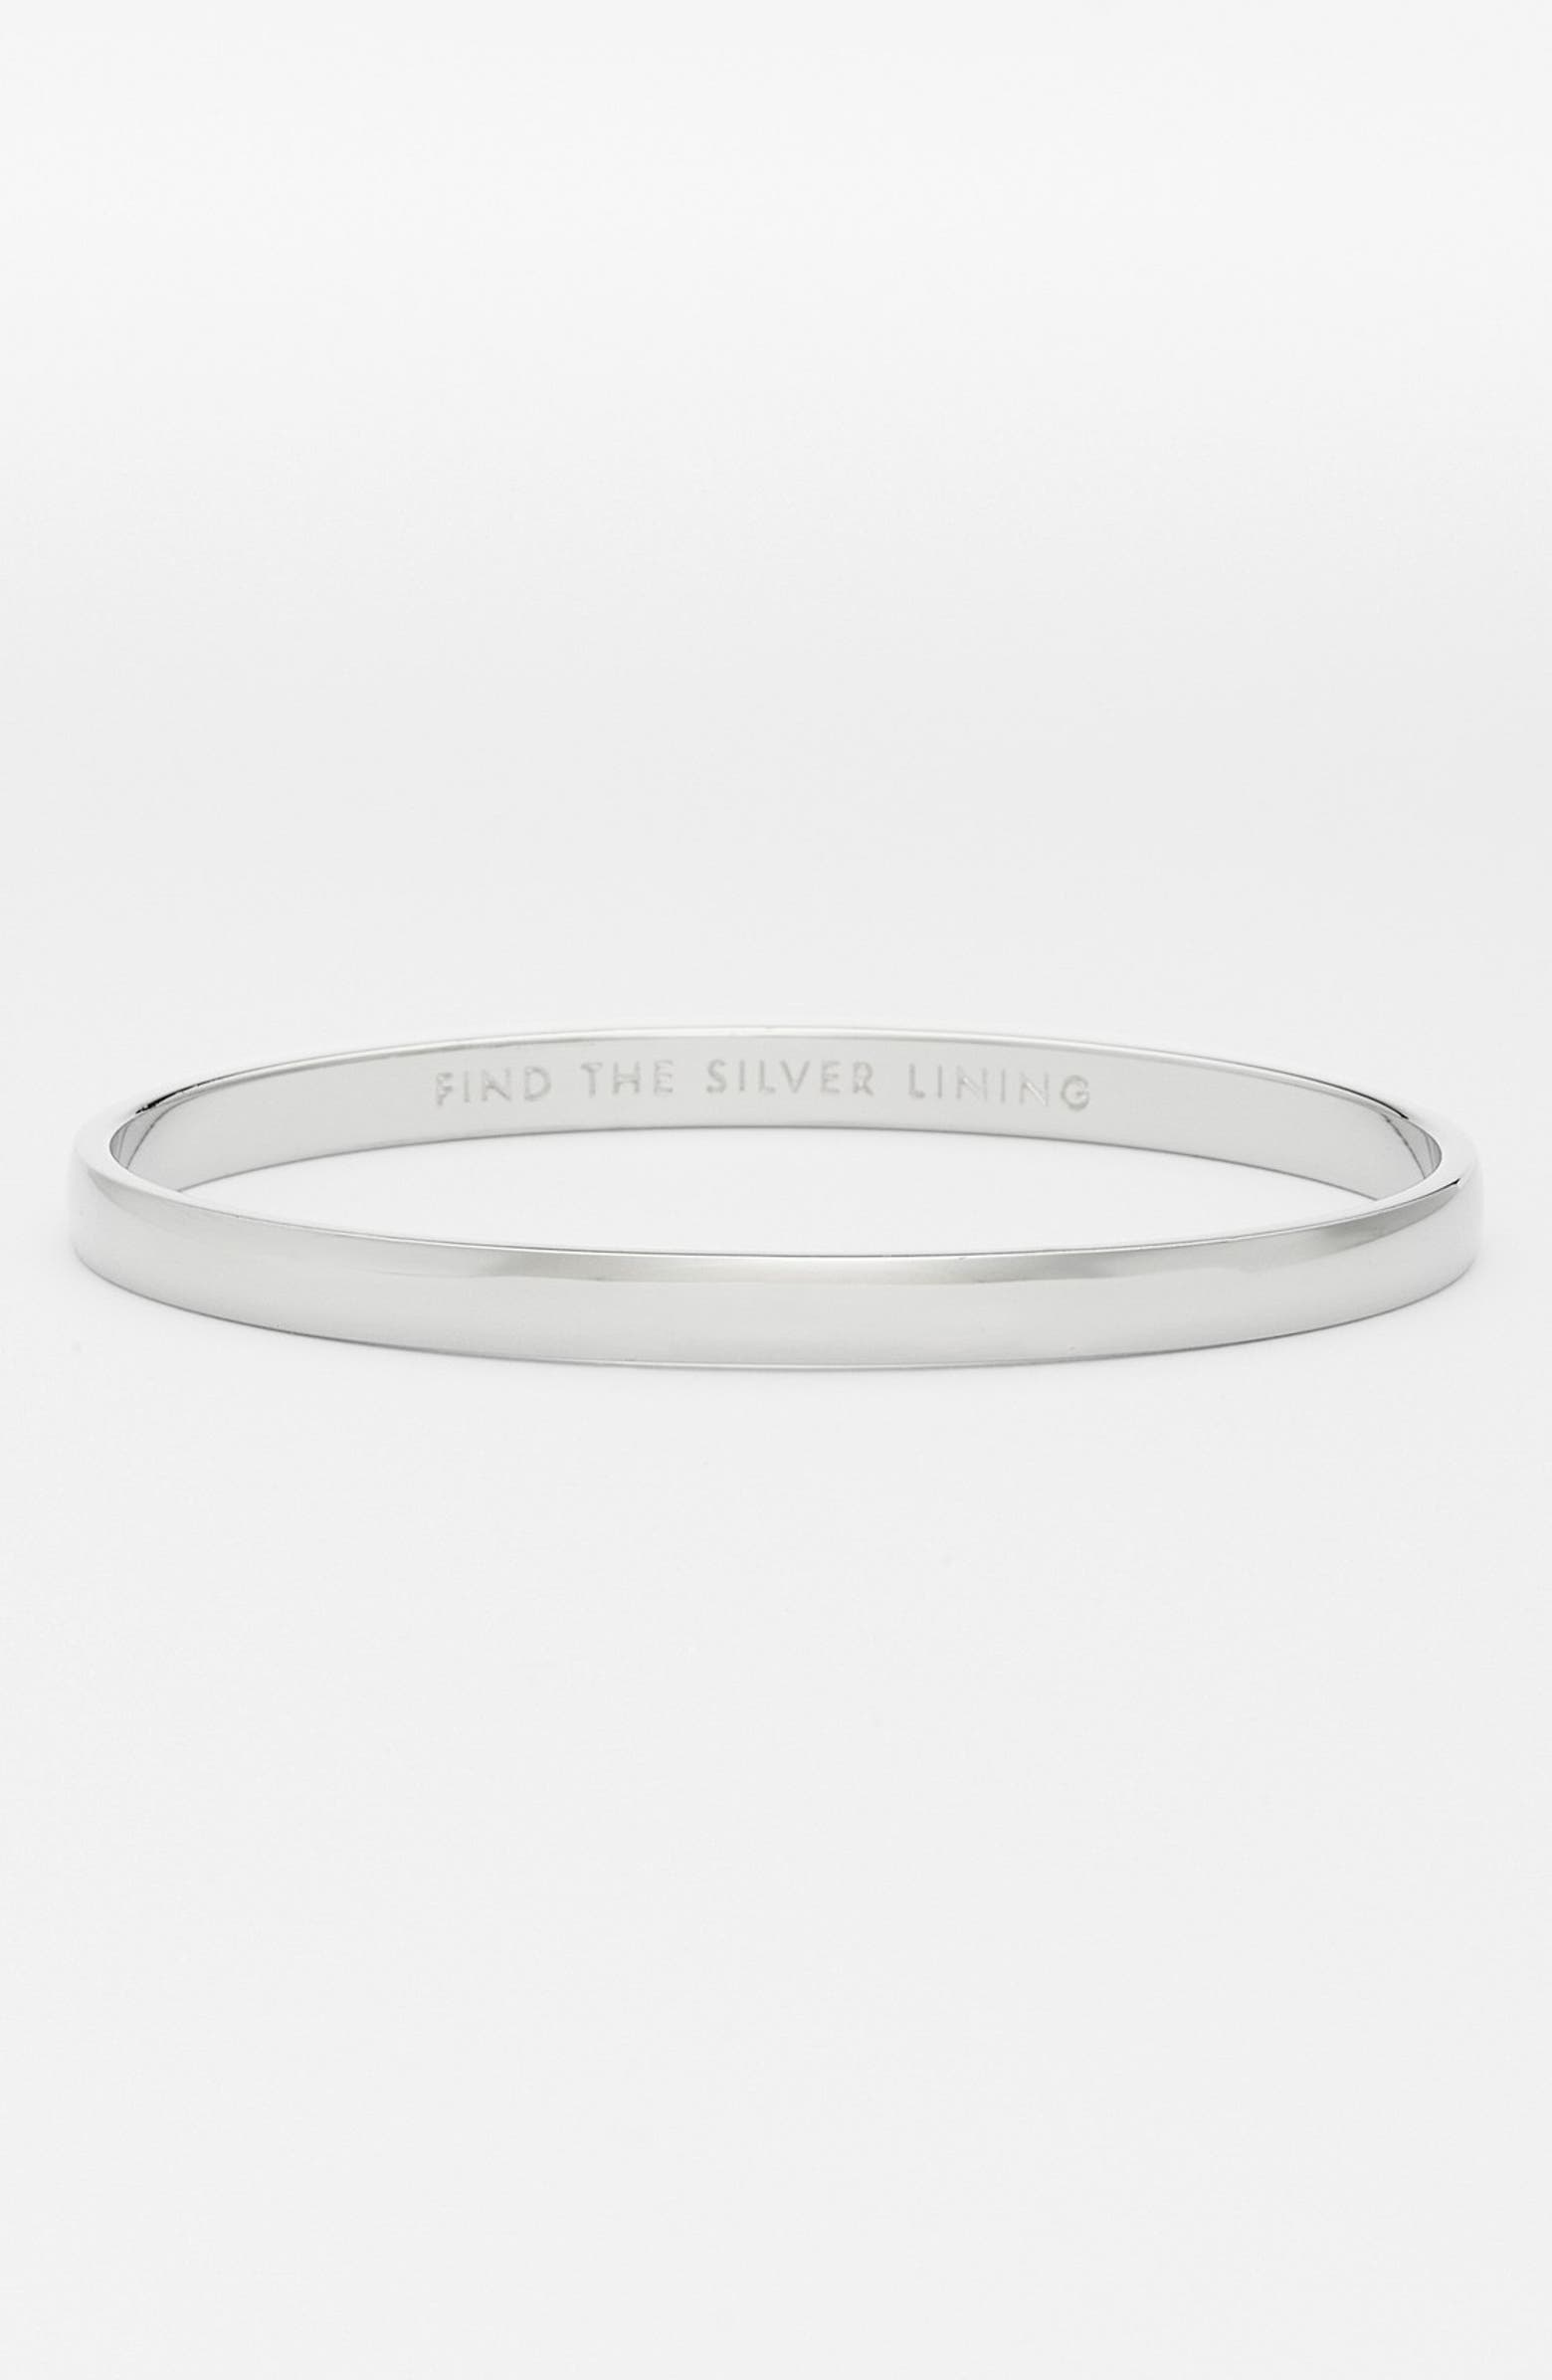 kate spade new york 'idiom - find the silver lining' bangle | Nordstrom